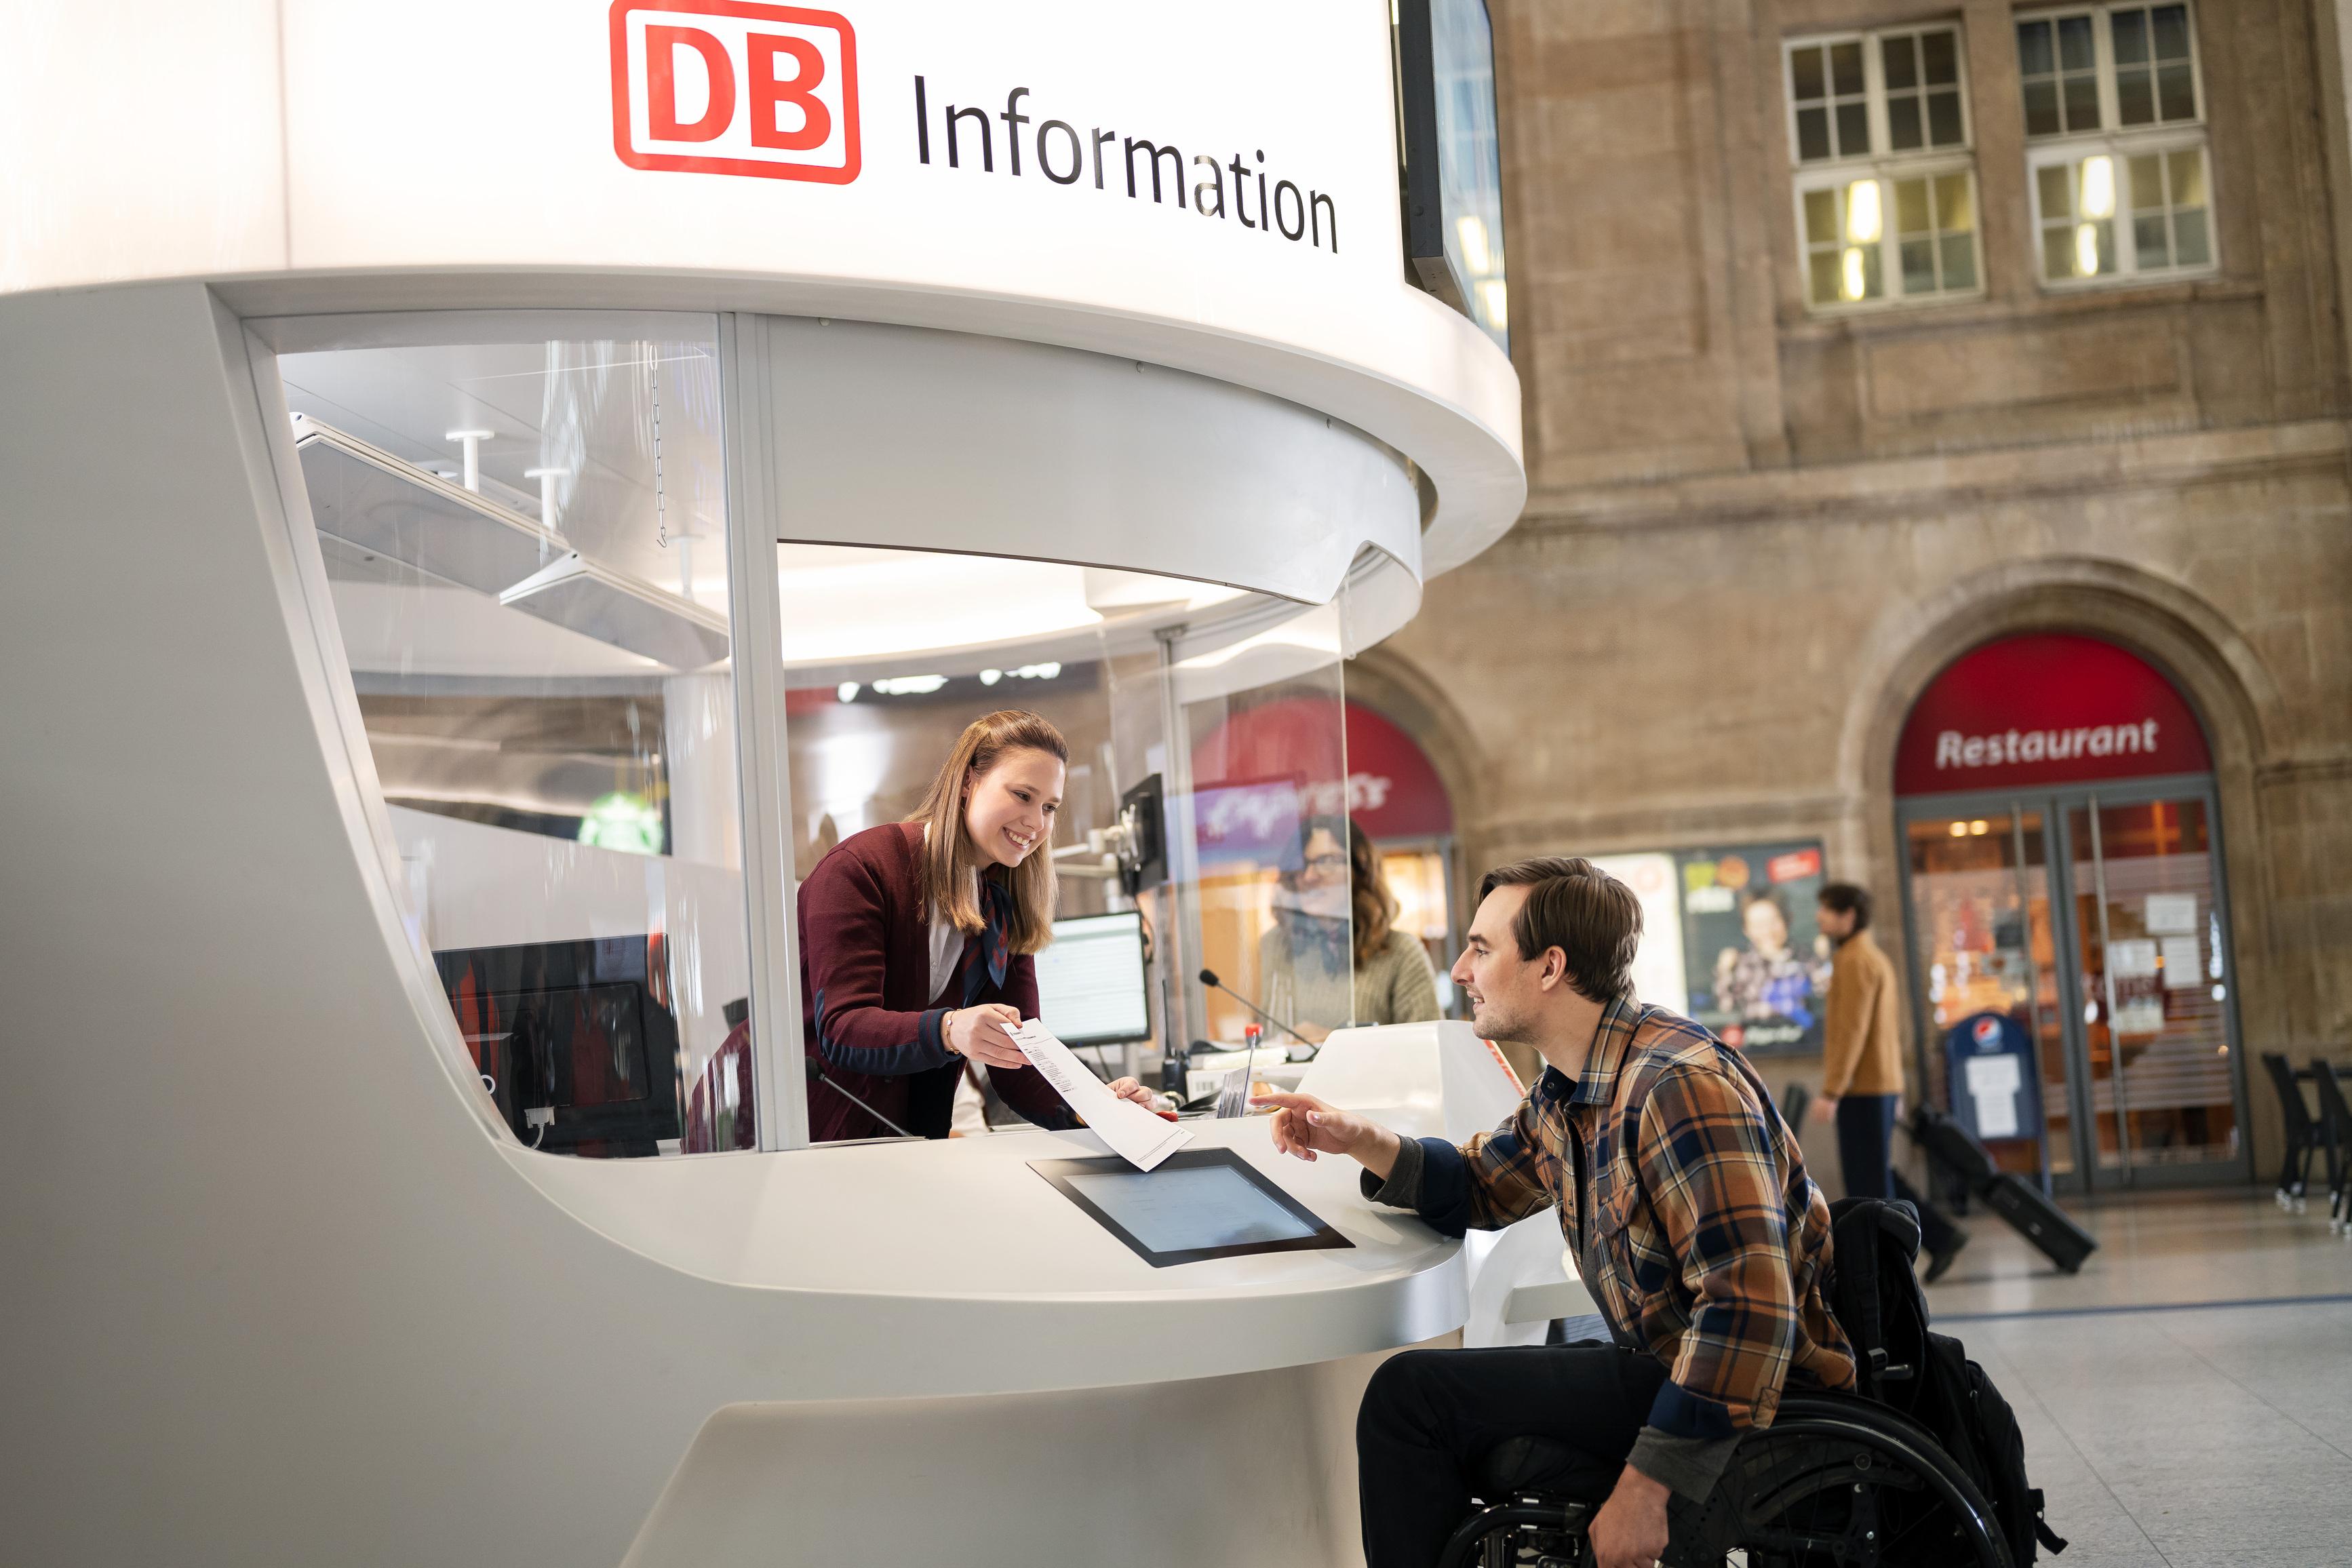 A wheelchair user gets information at the DB Information at a train station.